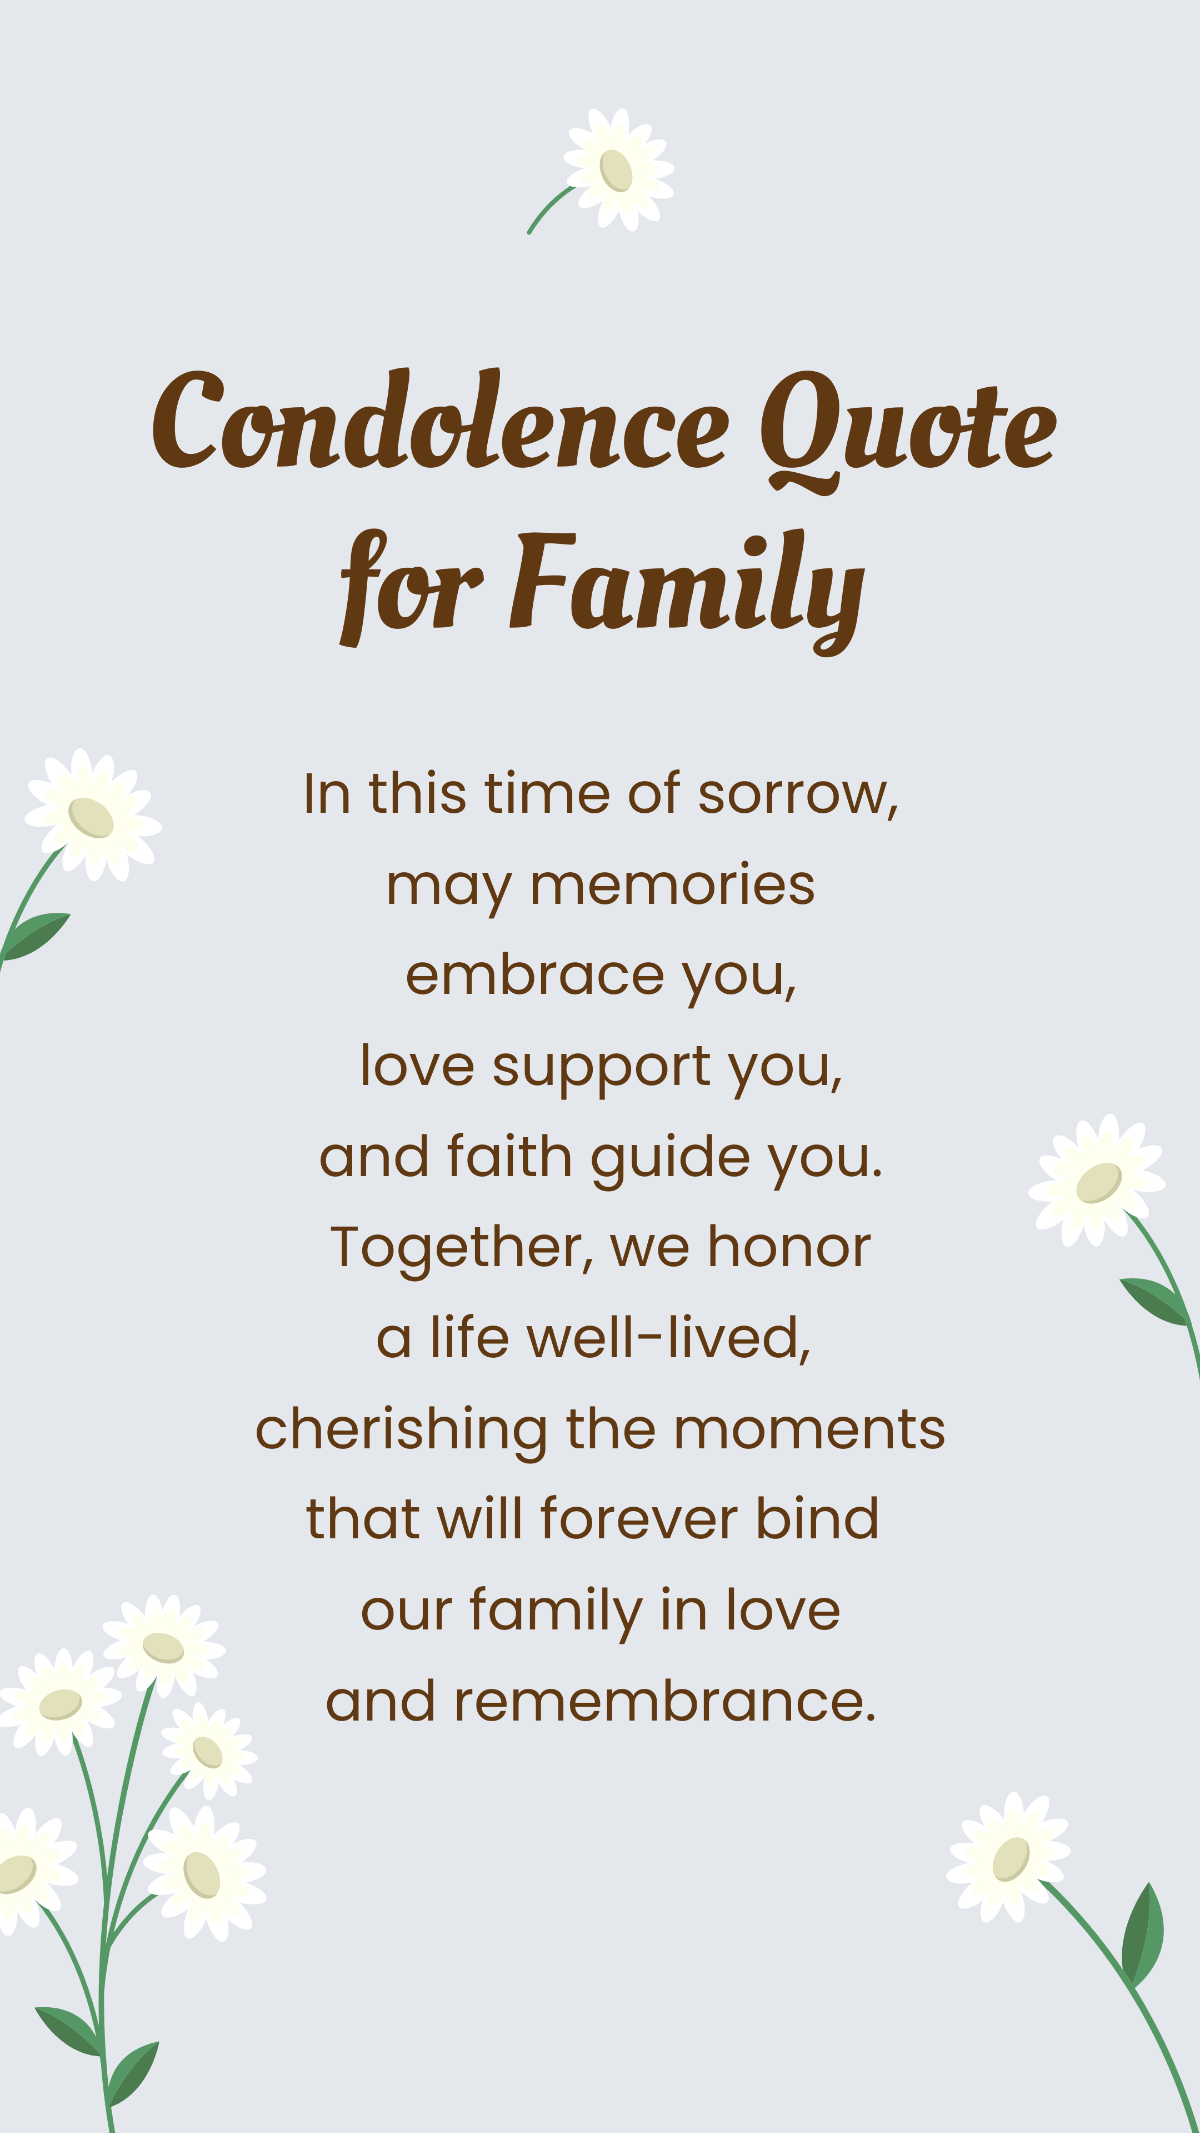 Condolence Quote For Family Template